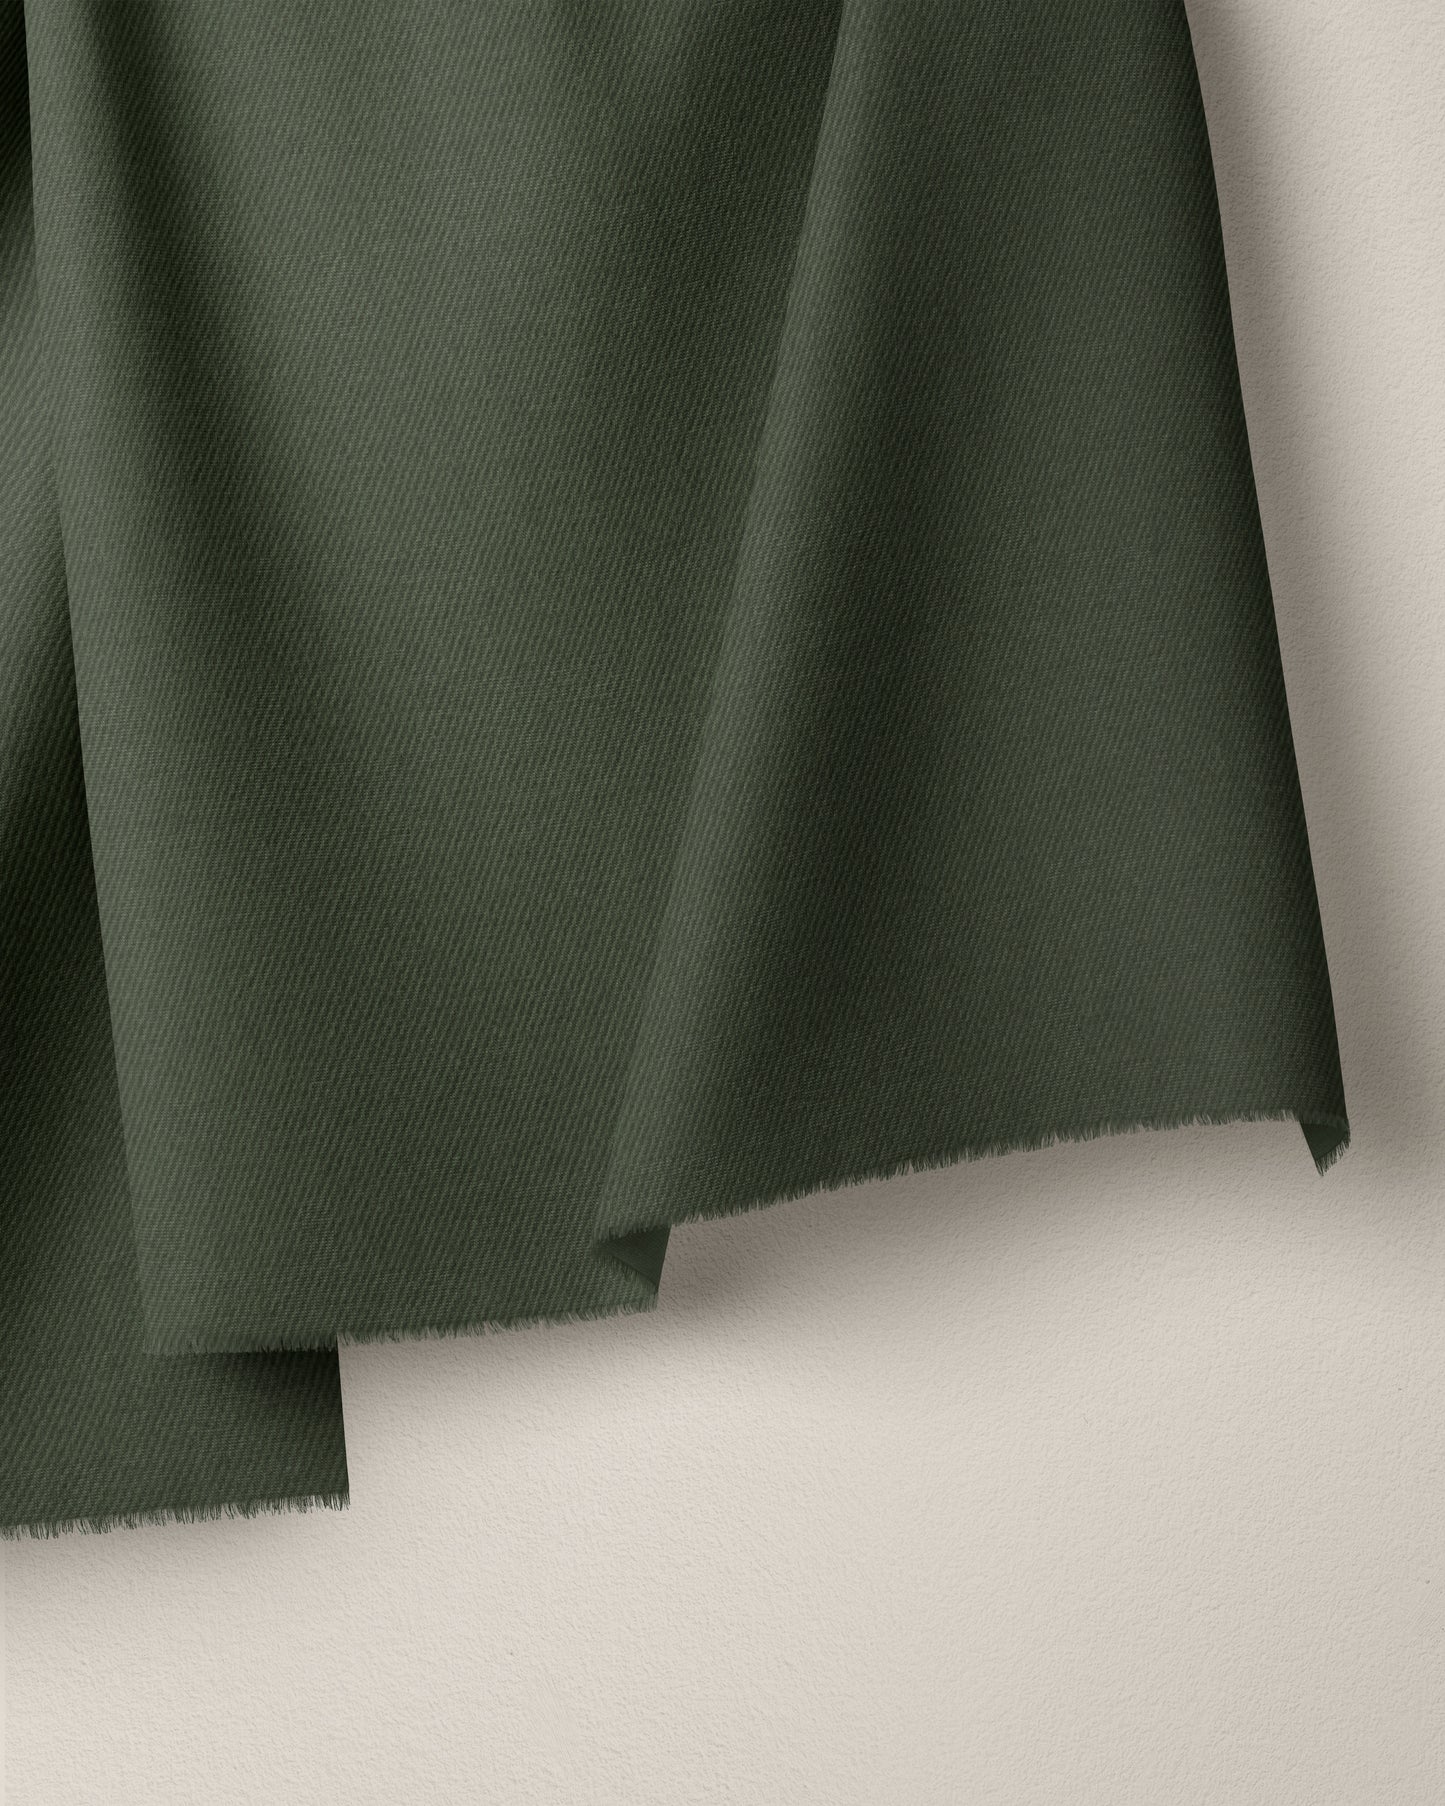 Olive Washed Cotton Twill